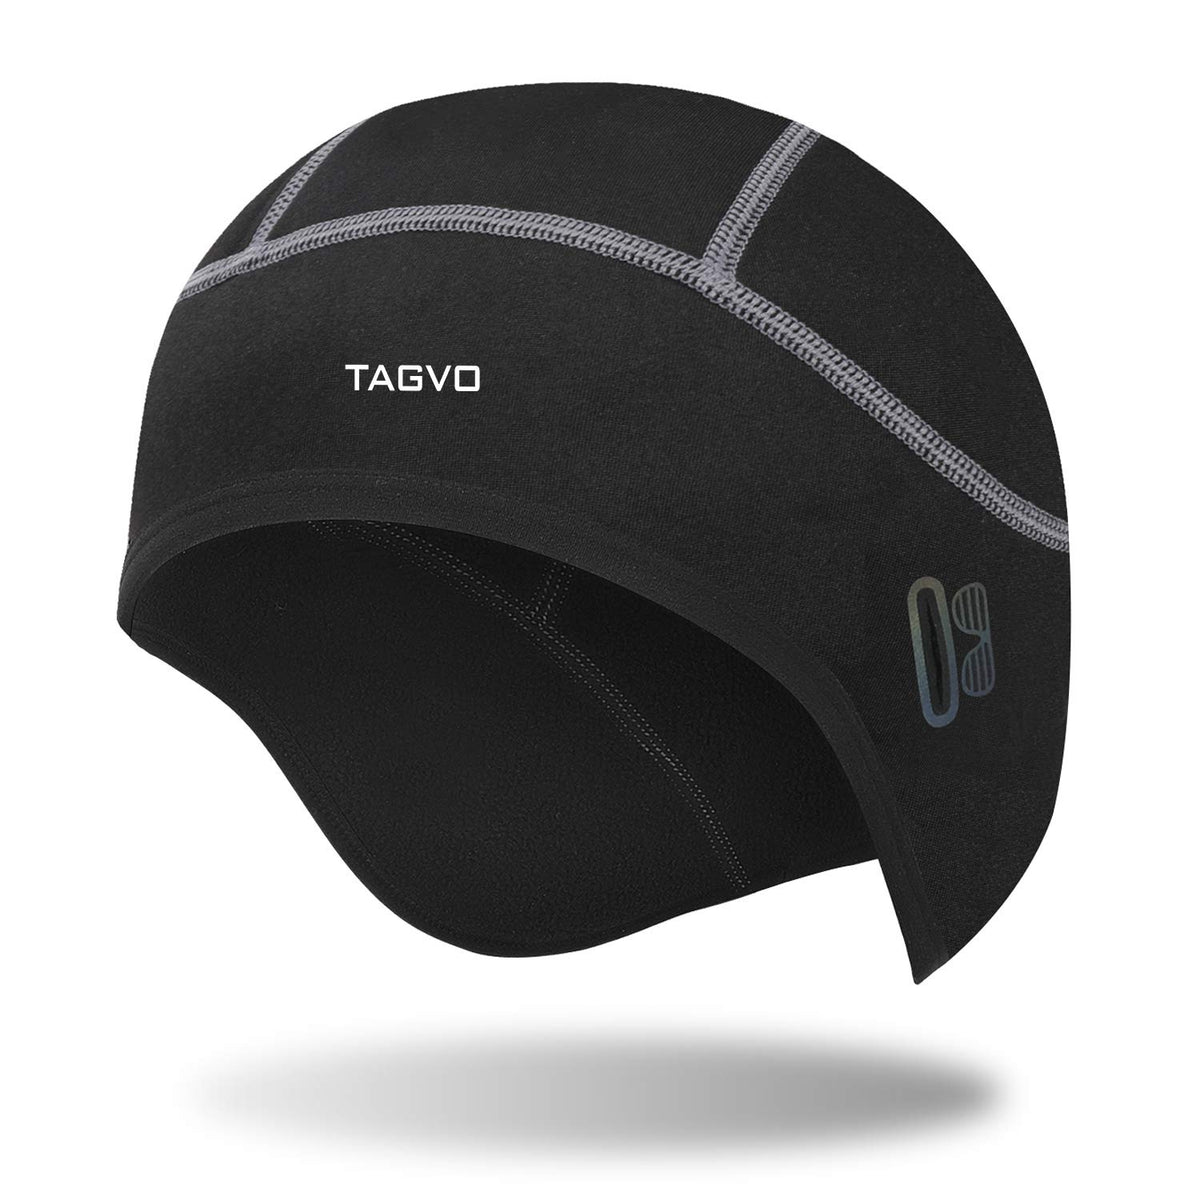 TAGVO Thermal Skull Cap,Windproof Cycling Hat,Warm Helmet Liner with Glasses Hole,Winter Sports Beanie Cap with Ear Cover,Hard Hat Liner Fit for Wen?Women,One Size,Black